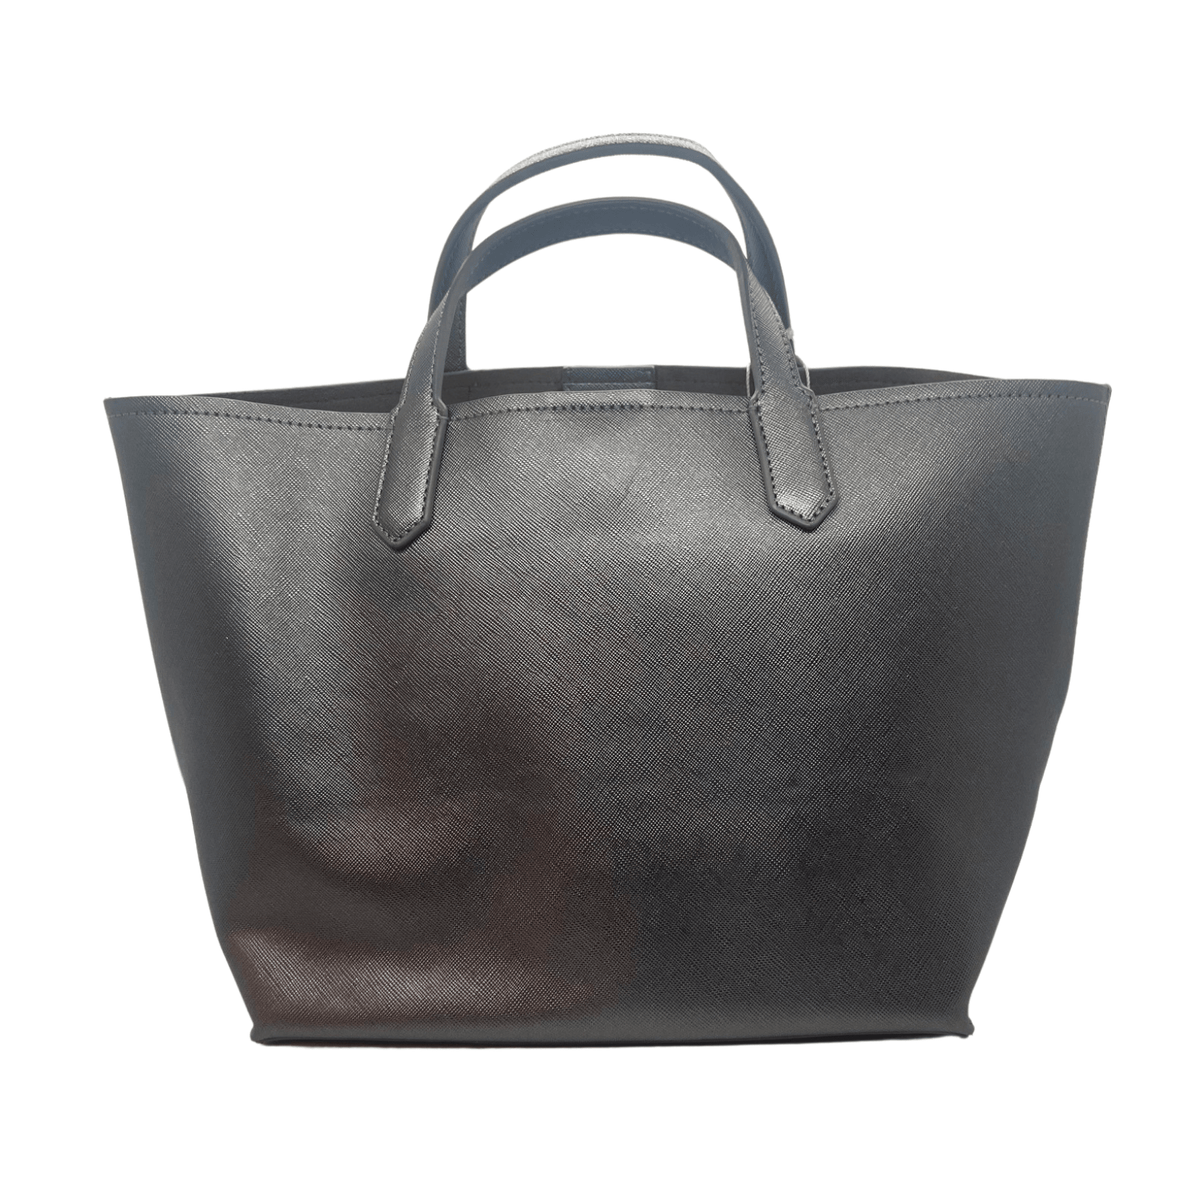 DEUX LUX Satchel - Metallic Graphite New w/out Tags– Wag N' Purr Shop